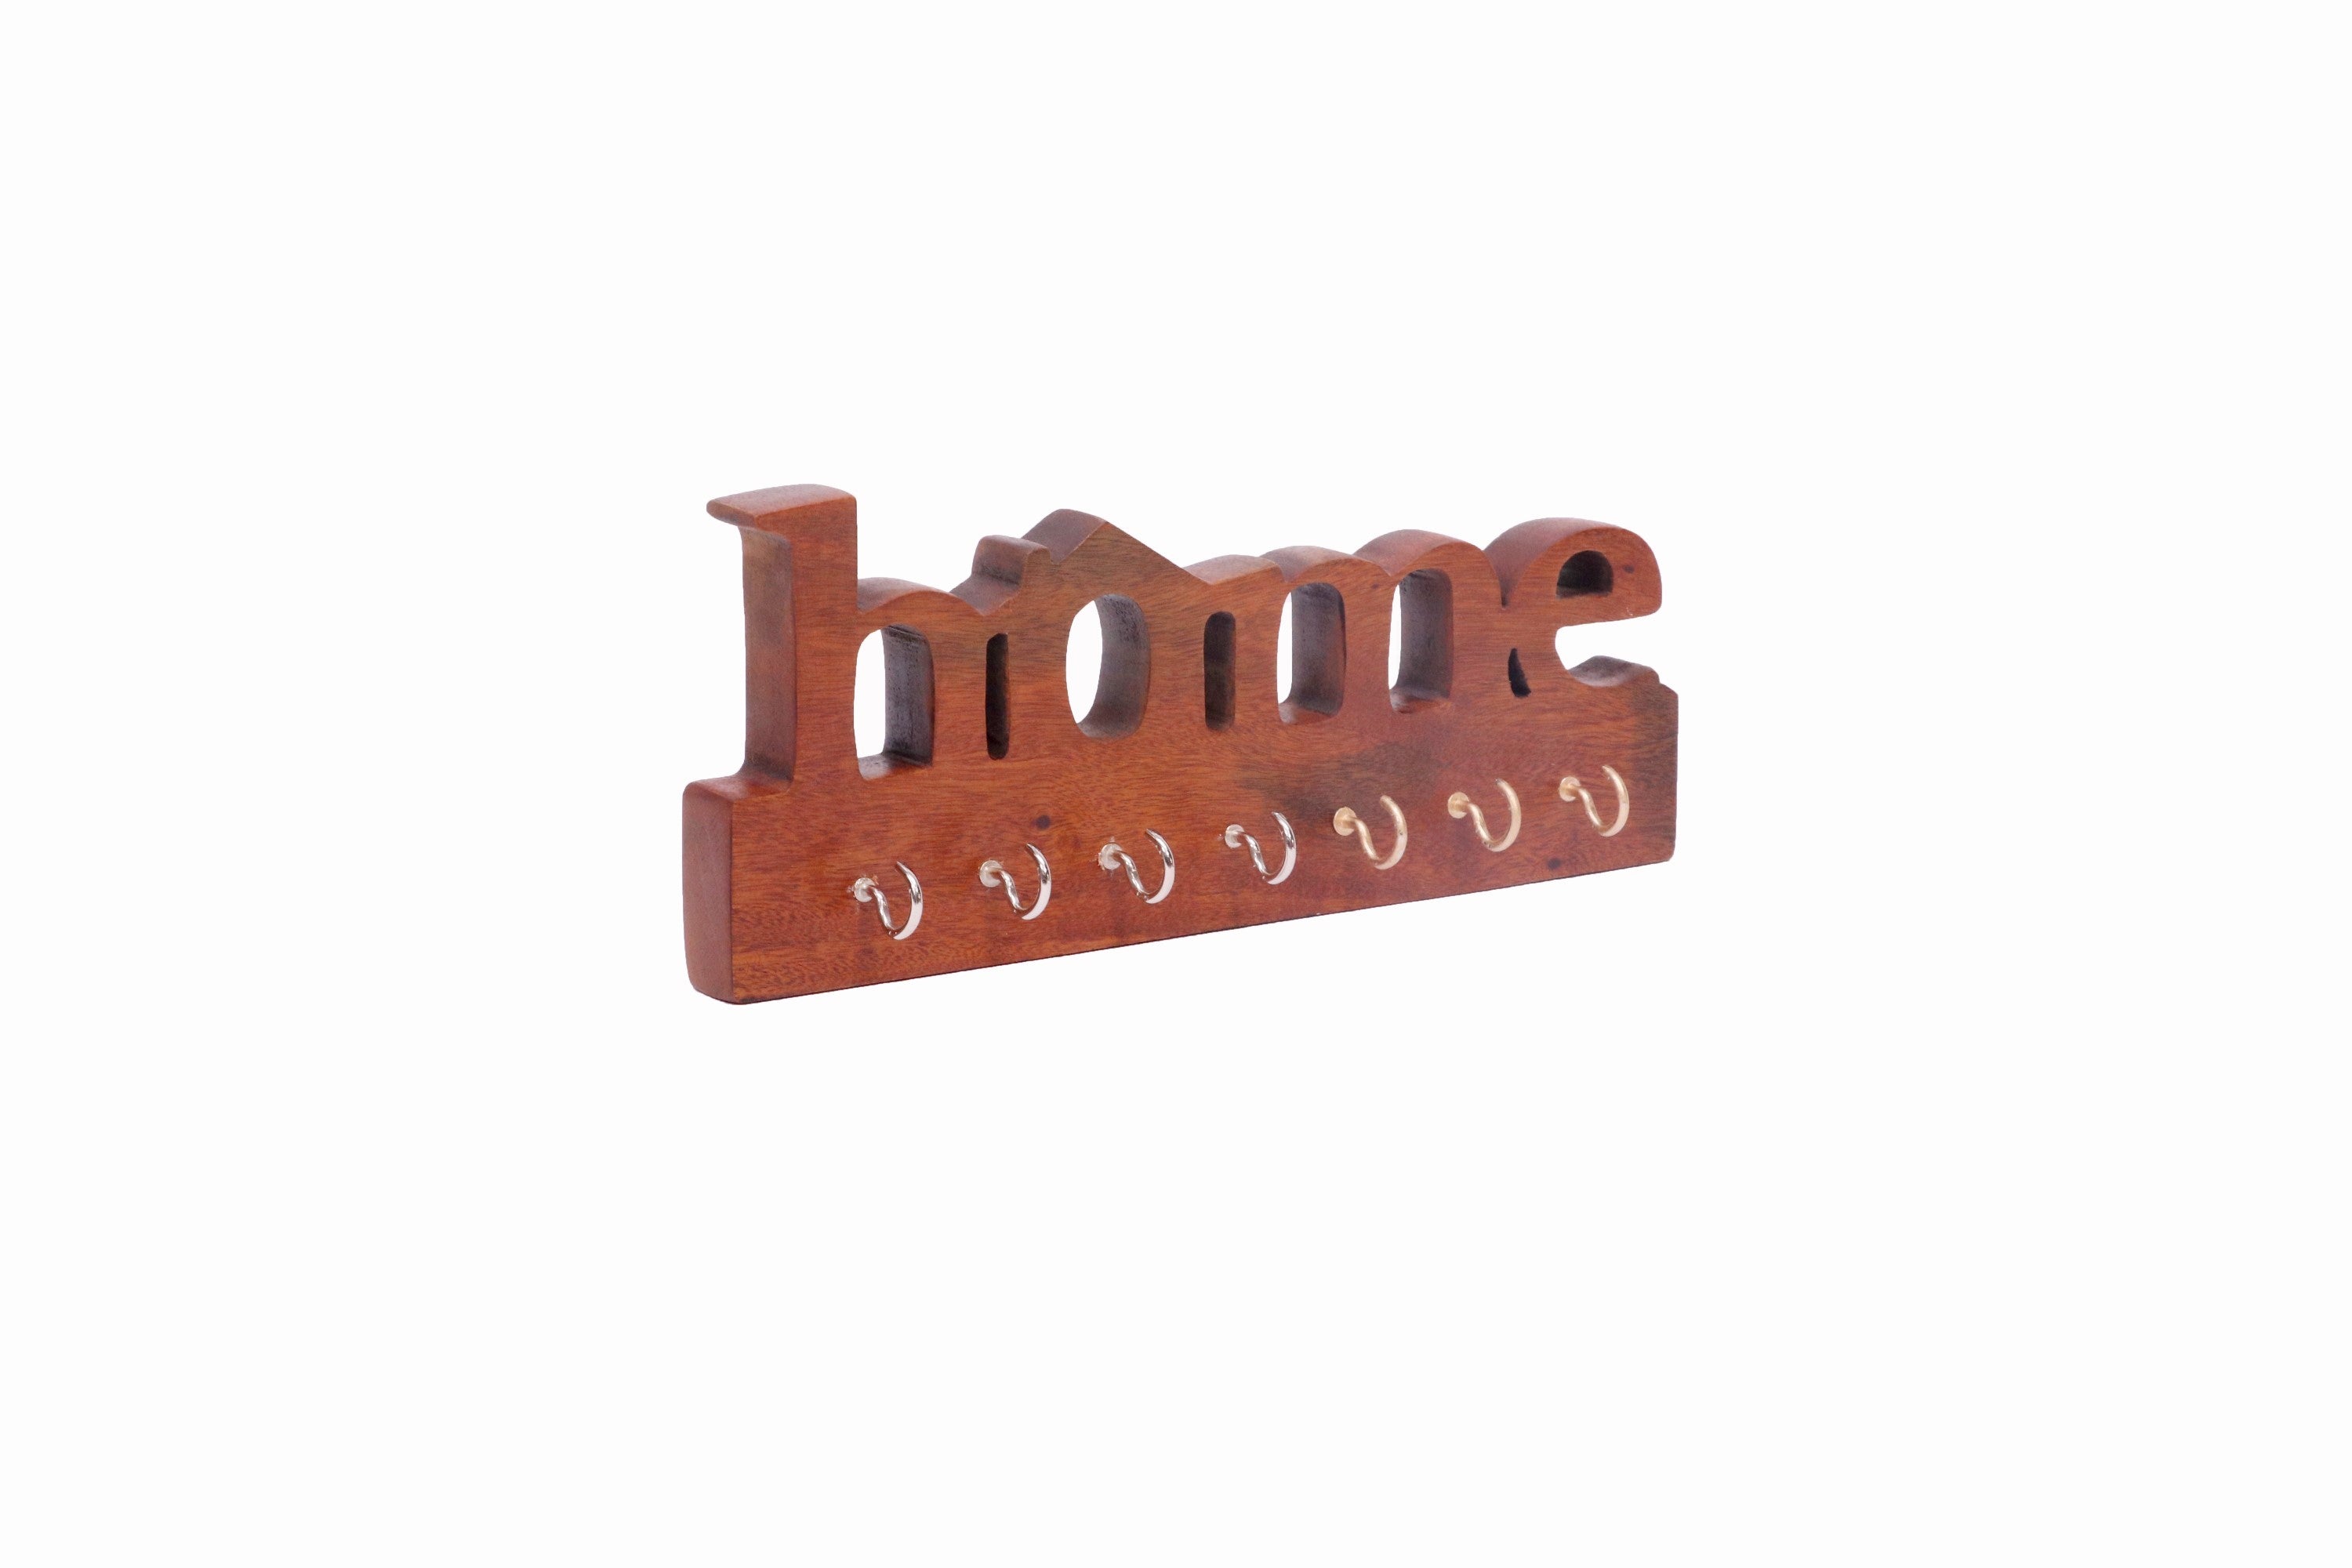 Solid wood Home shaped wall hanging Keychain Key Holder